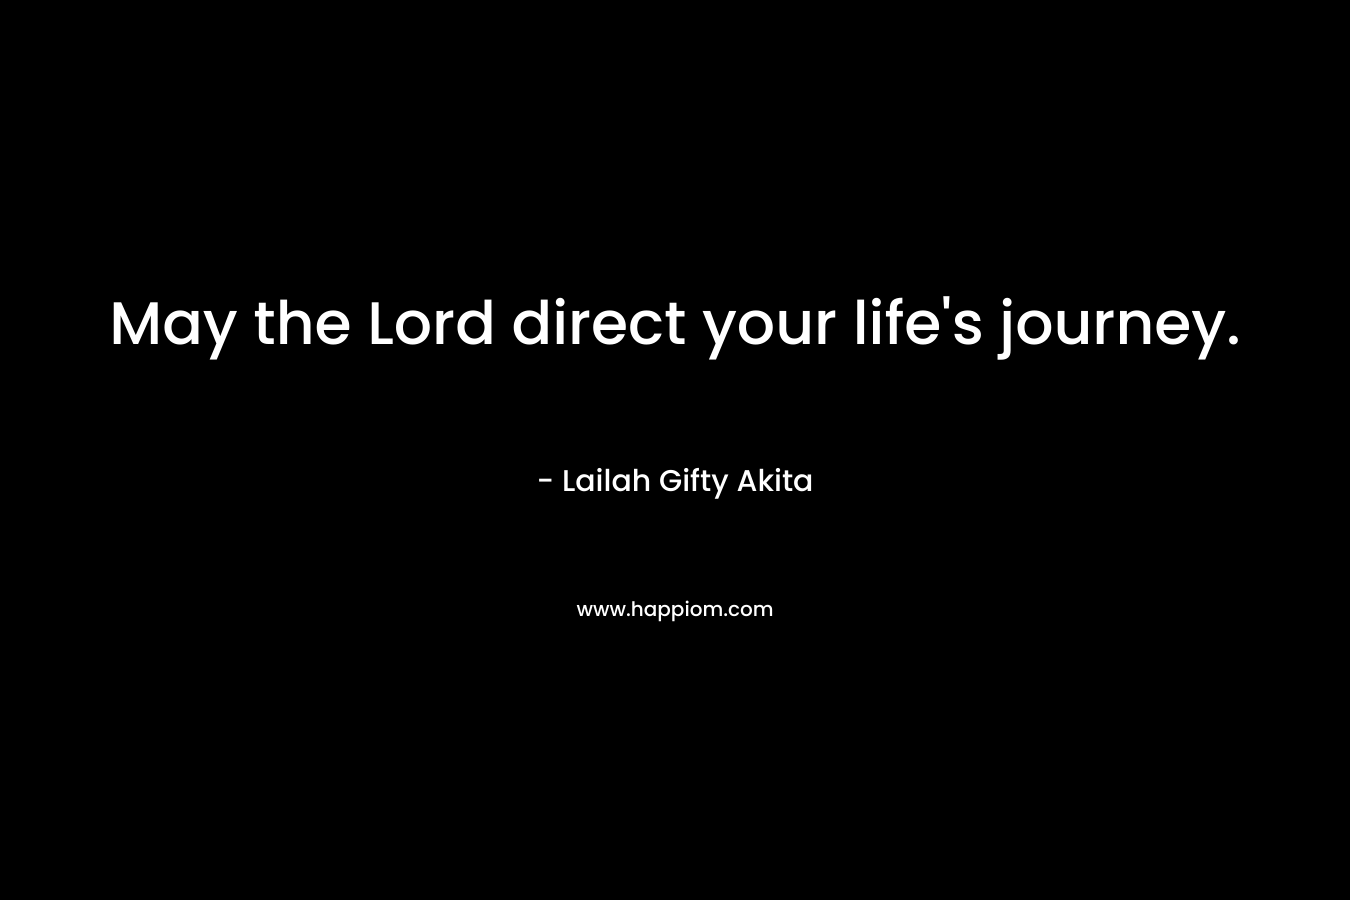 May the Lord direct your life's journey.